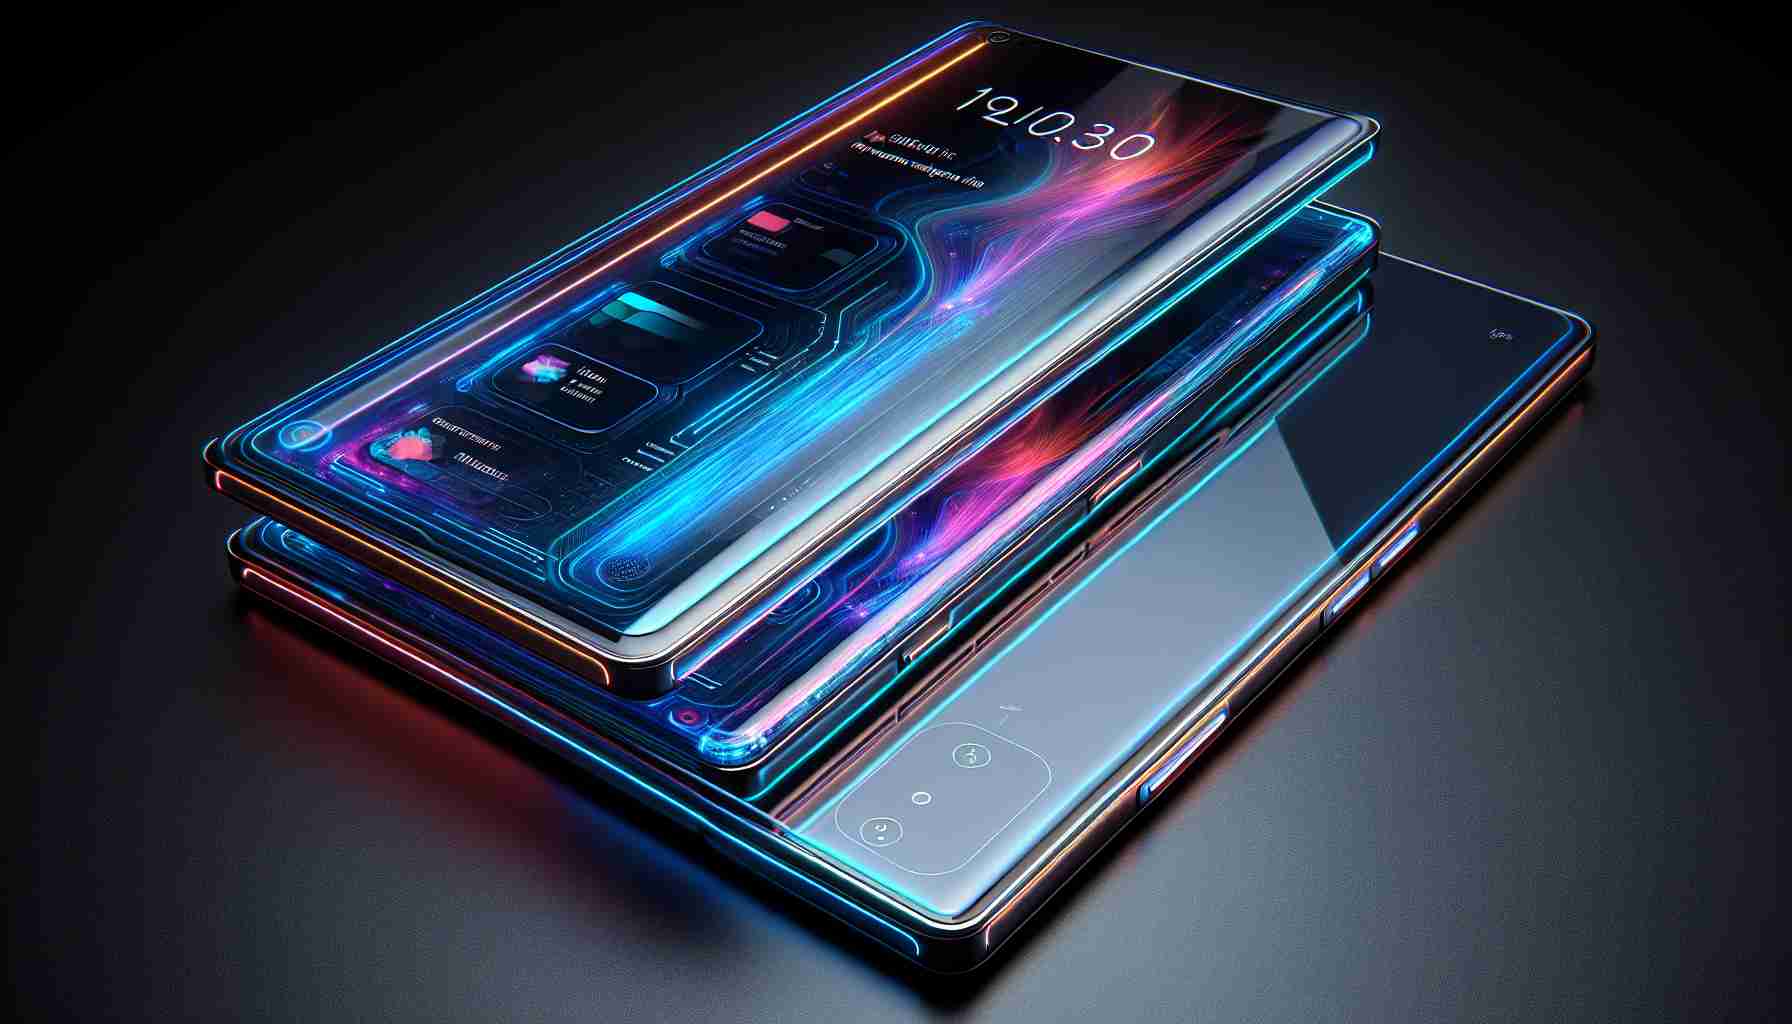 Detailed and realistic high-definition image of a futuristic concept smartphone. The design is highly innovative and novel, named as 'Pixel 9 Air'. The device is extravagantly thin and sleek with a translucent body. The screen extends edge to edge with vibrant colors. A sophisticated, advanced camera system is visible on the rear.